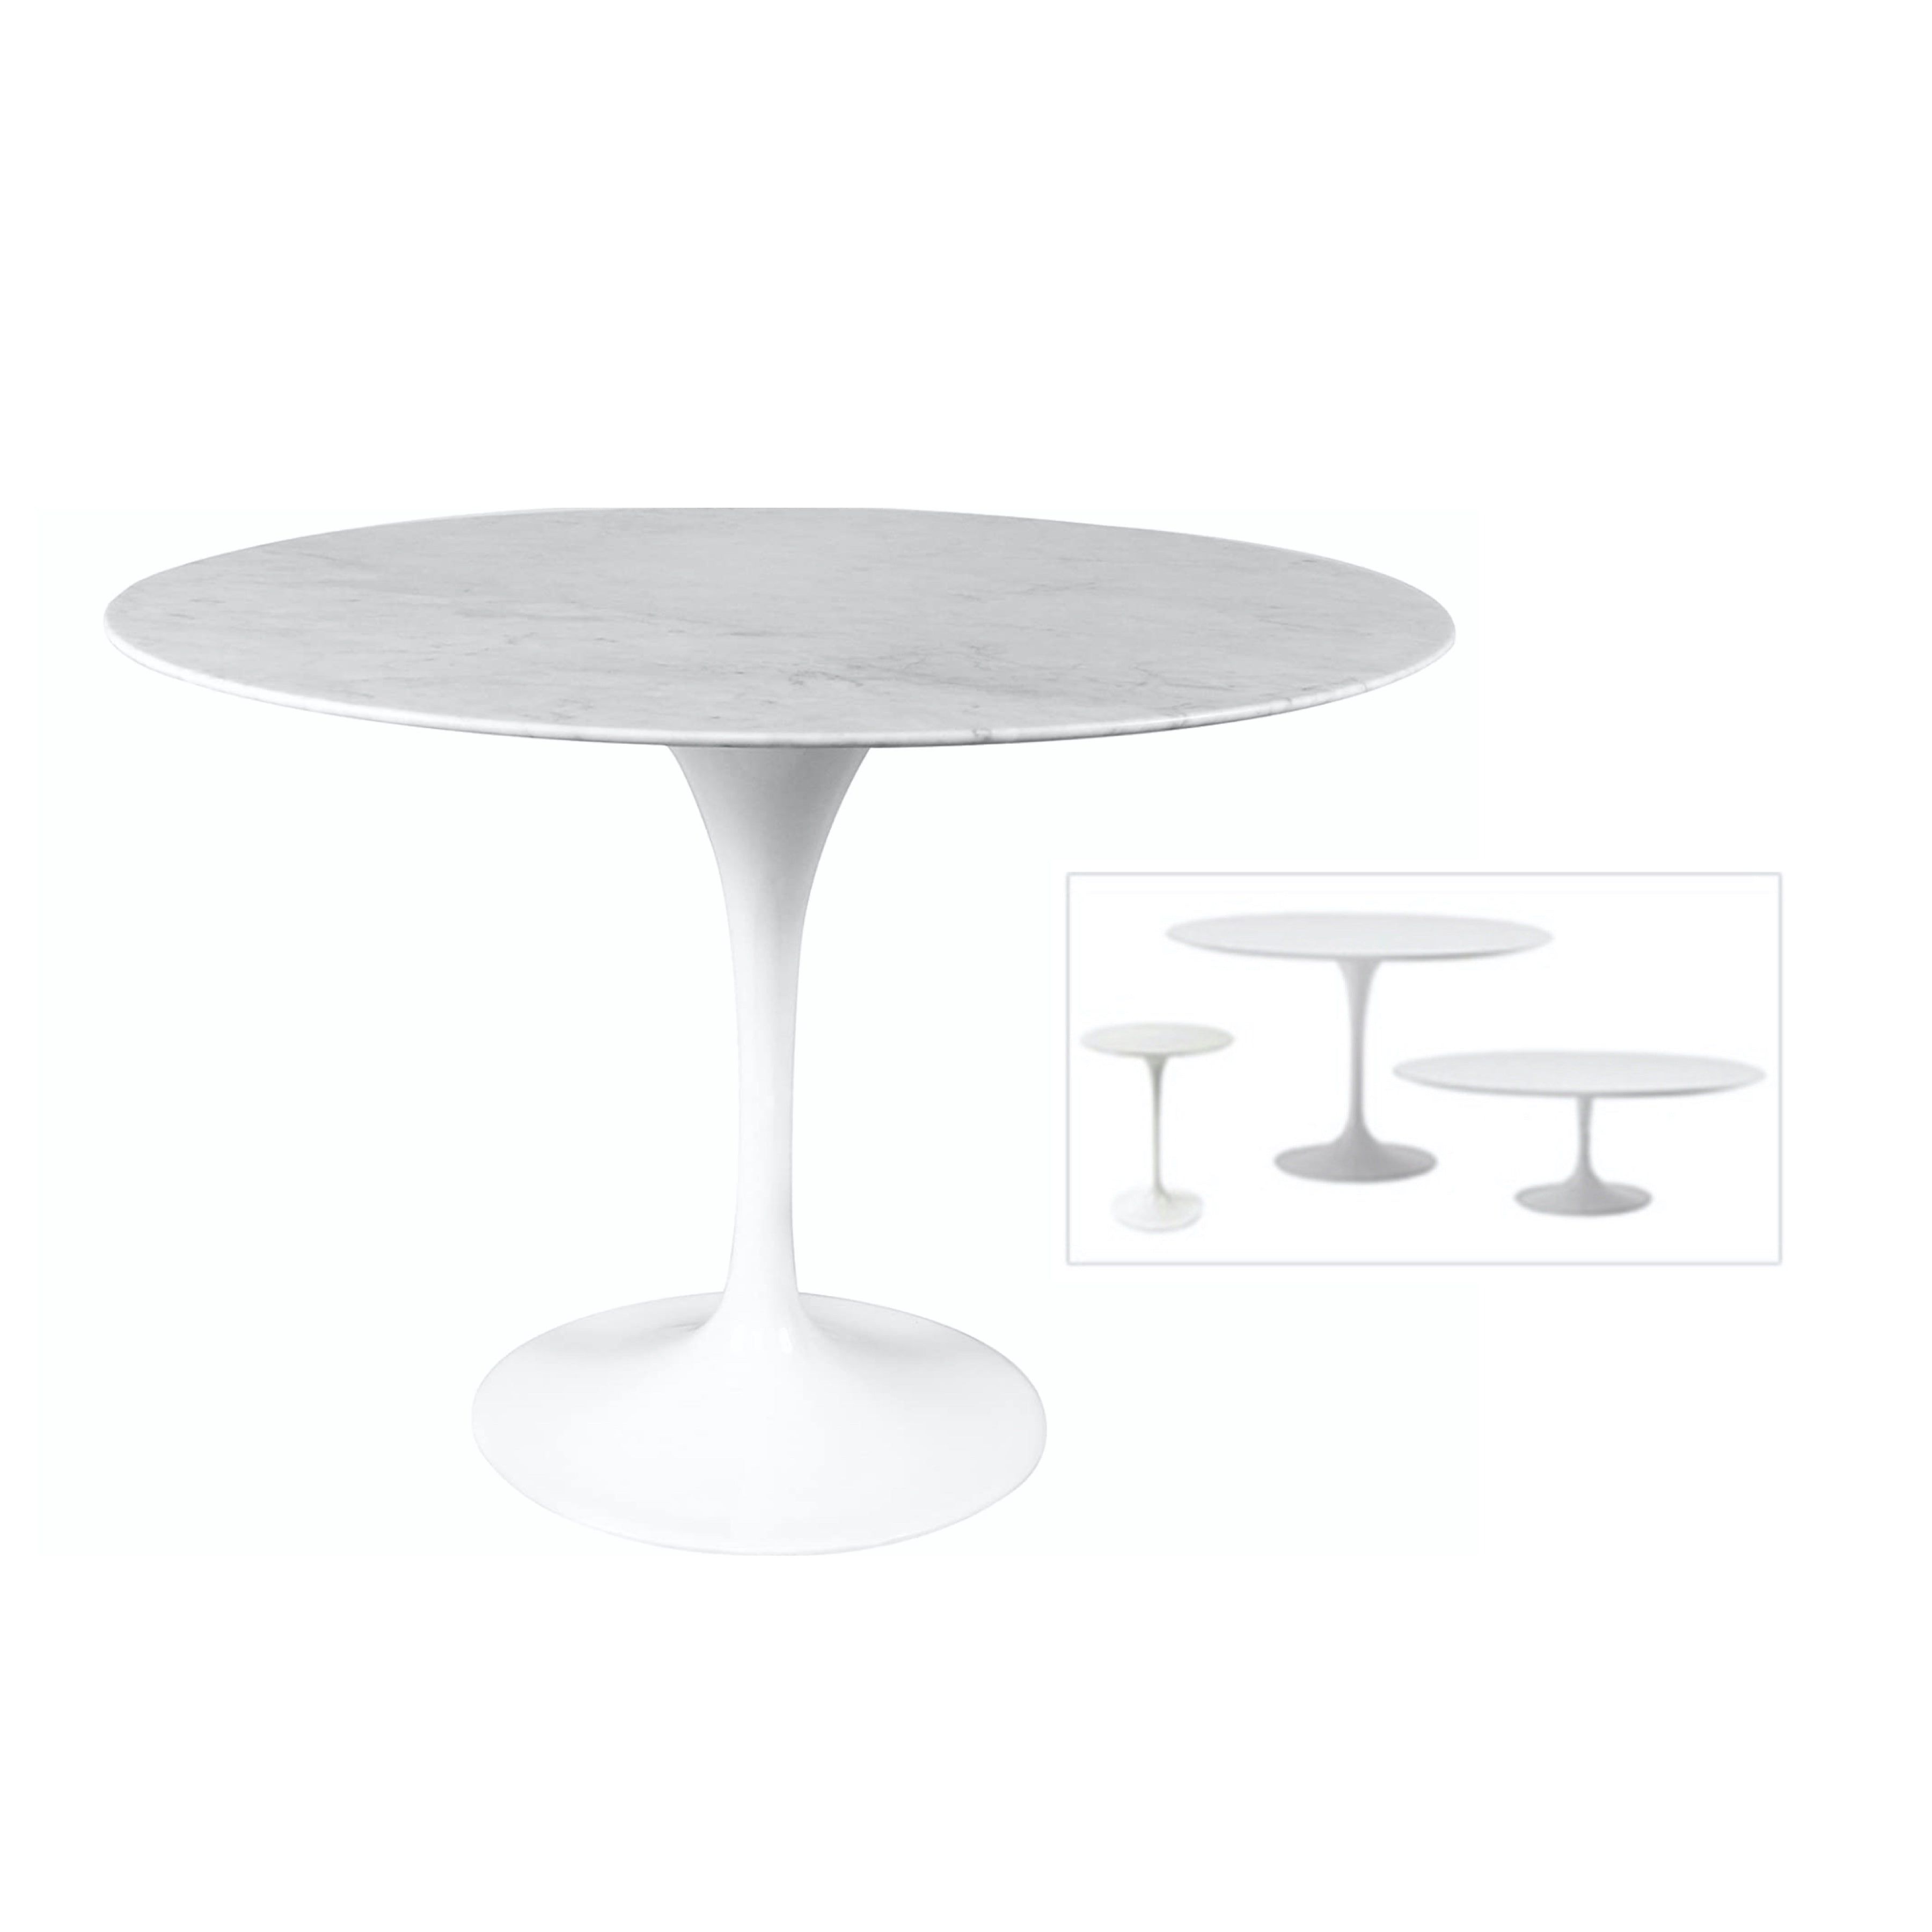 TR70014 Tulip marble table